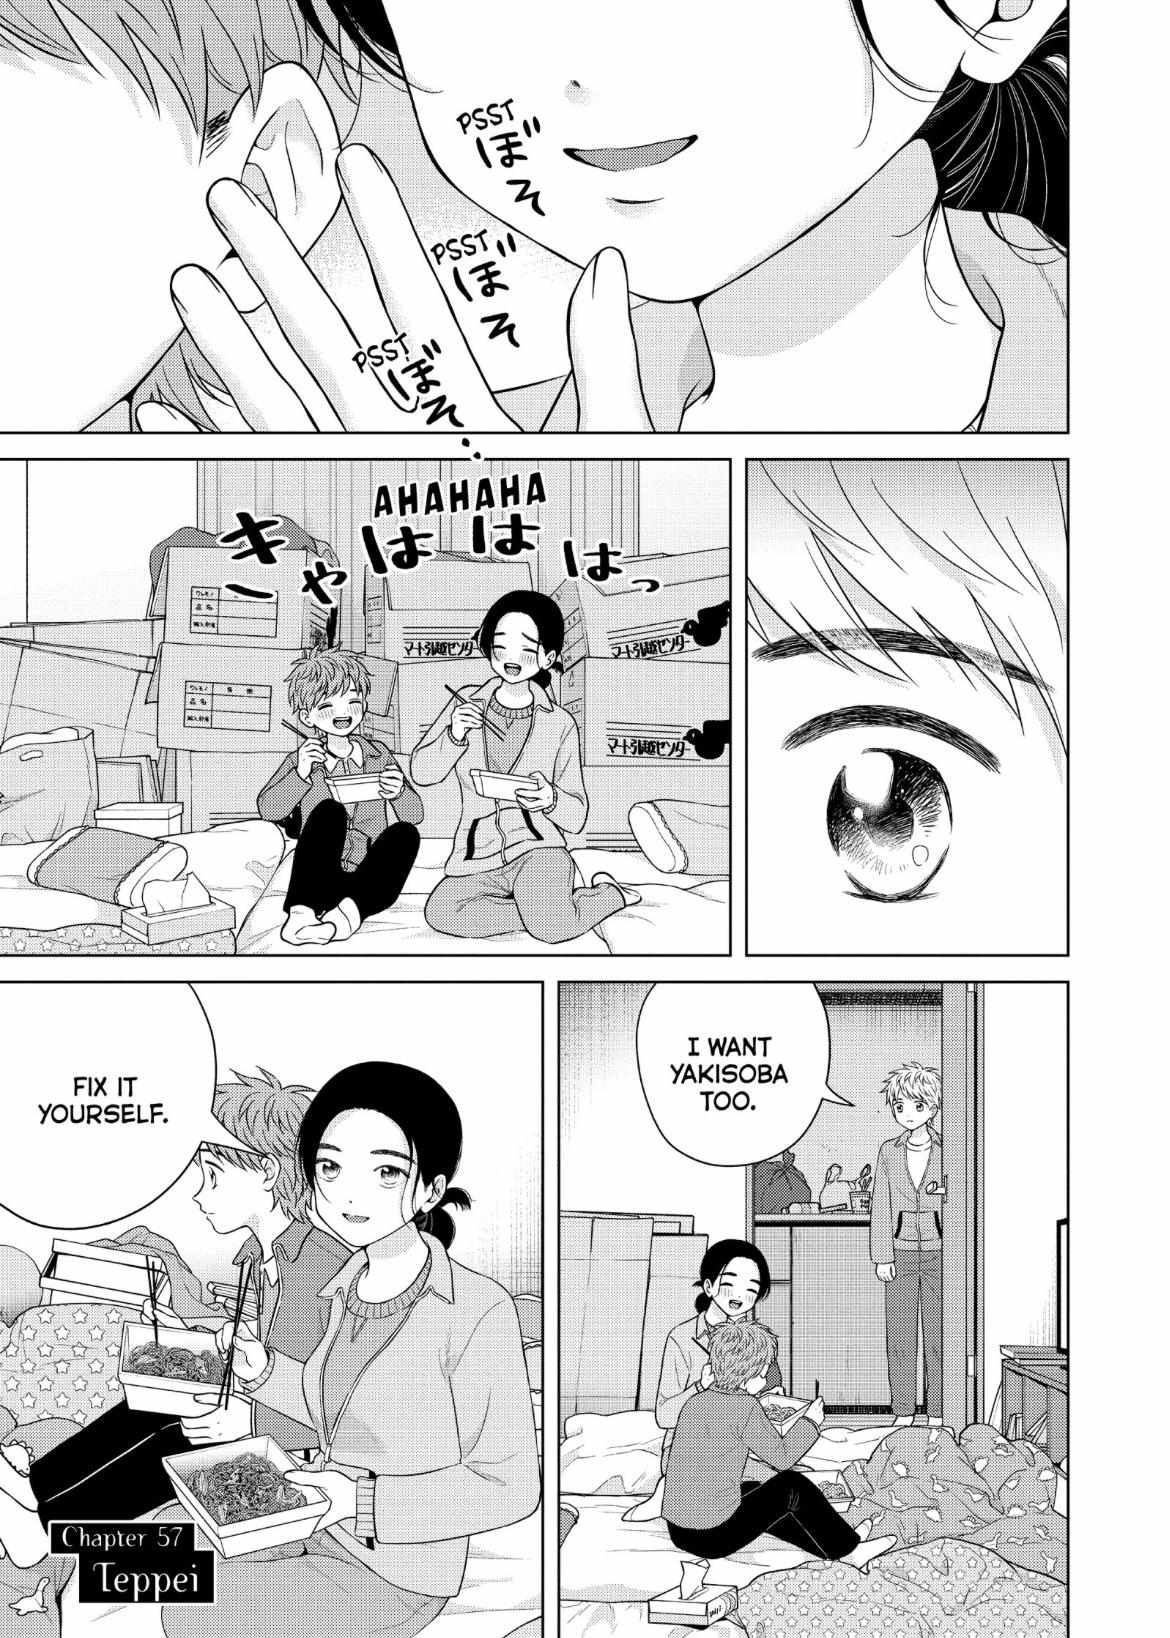 I Want to Hold Aono-kun so Badly I Could Die - chapter 57 - #3